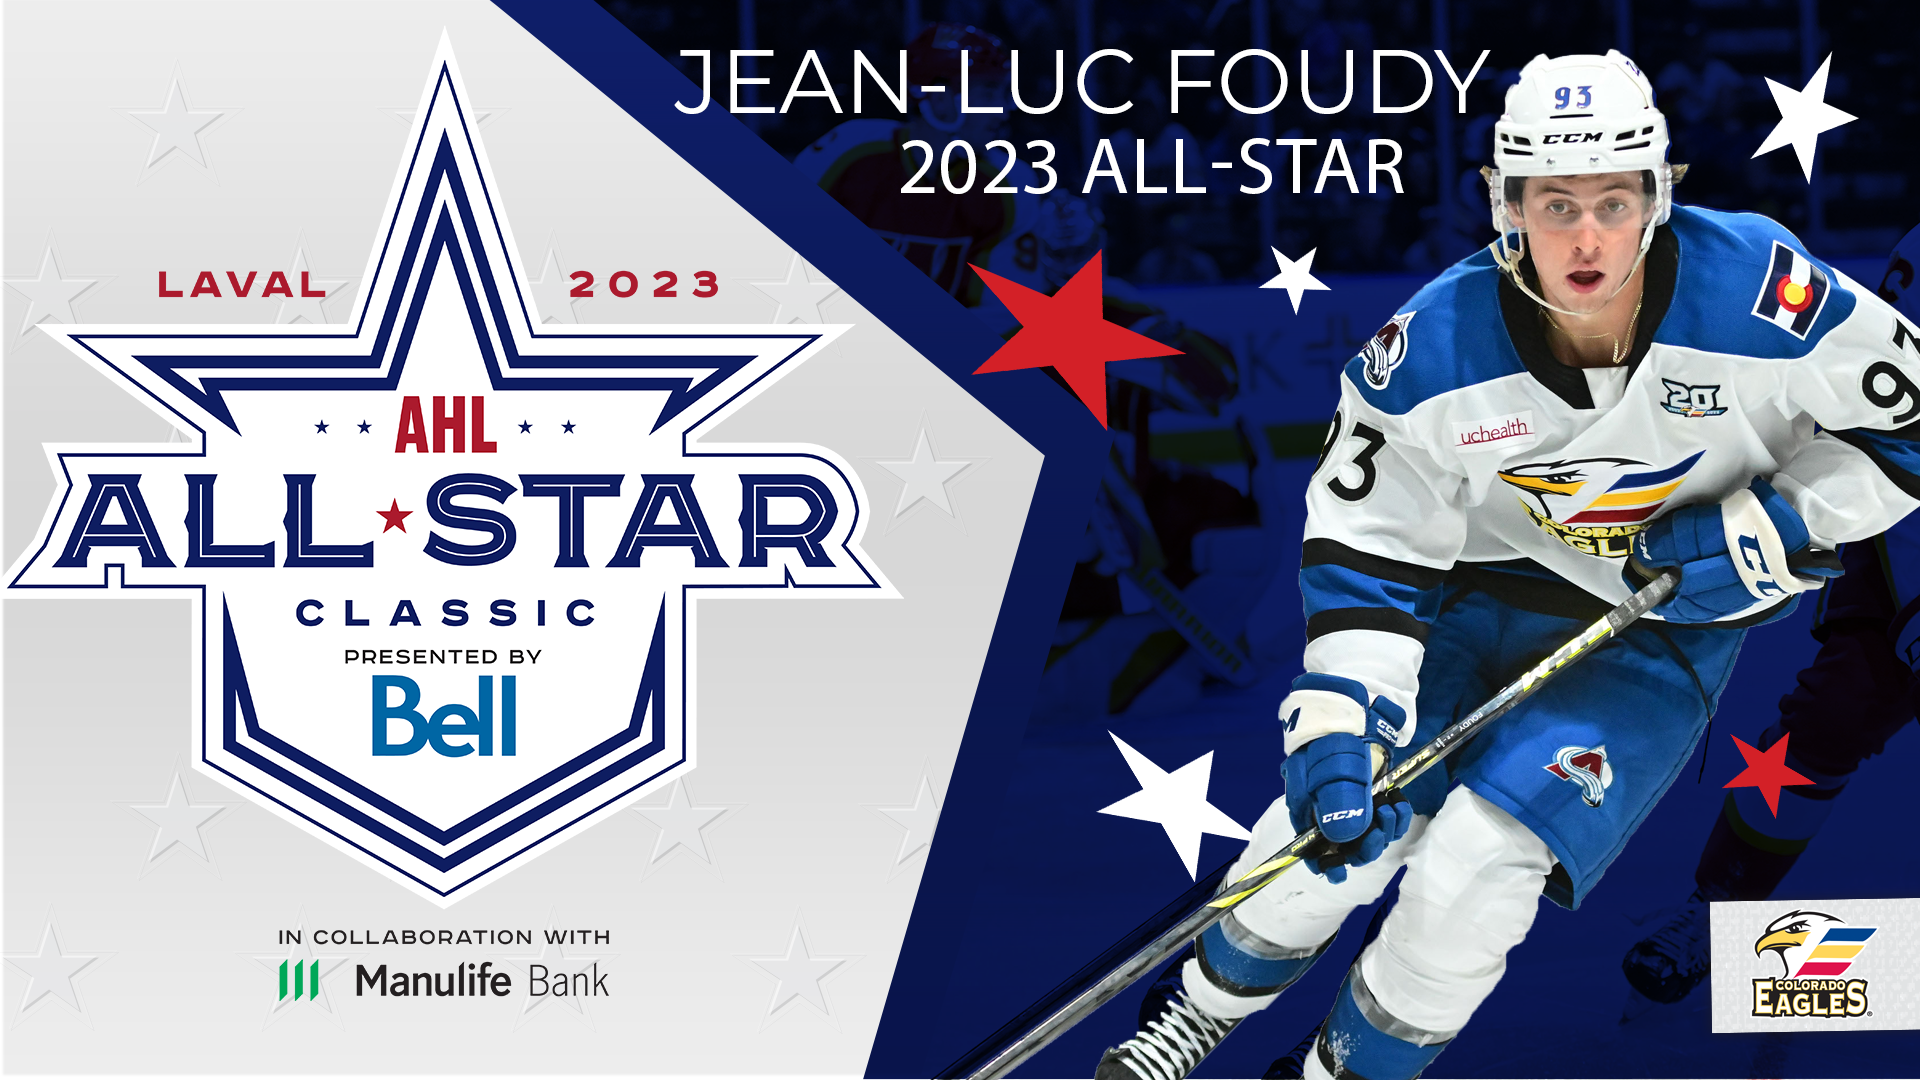 Trio of Calgary Wranglers named to 2023 all-star squad